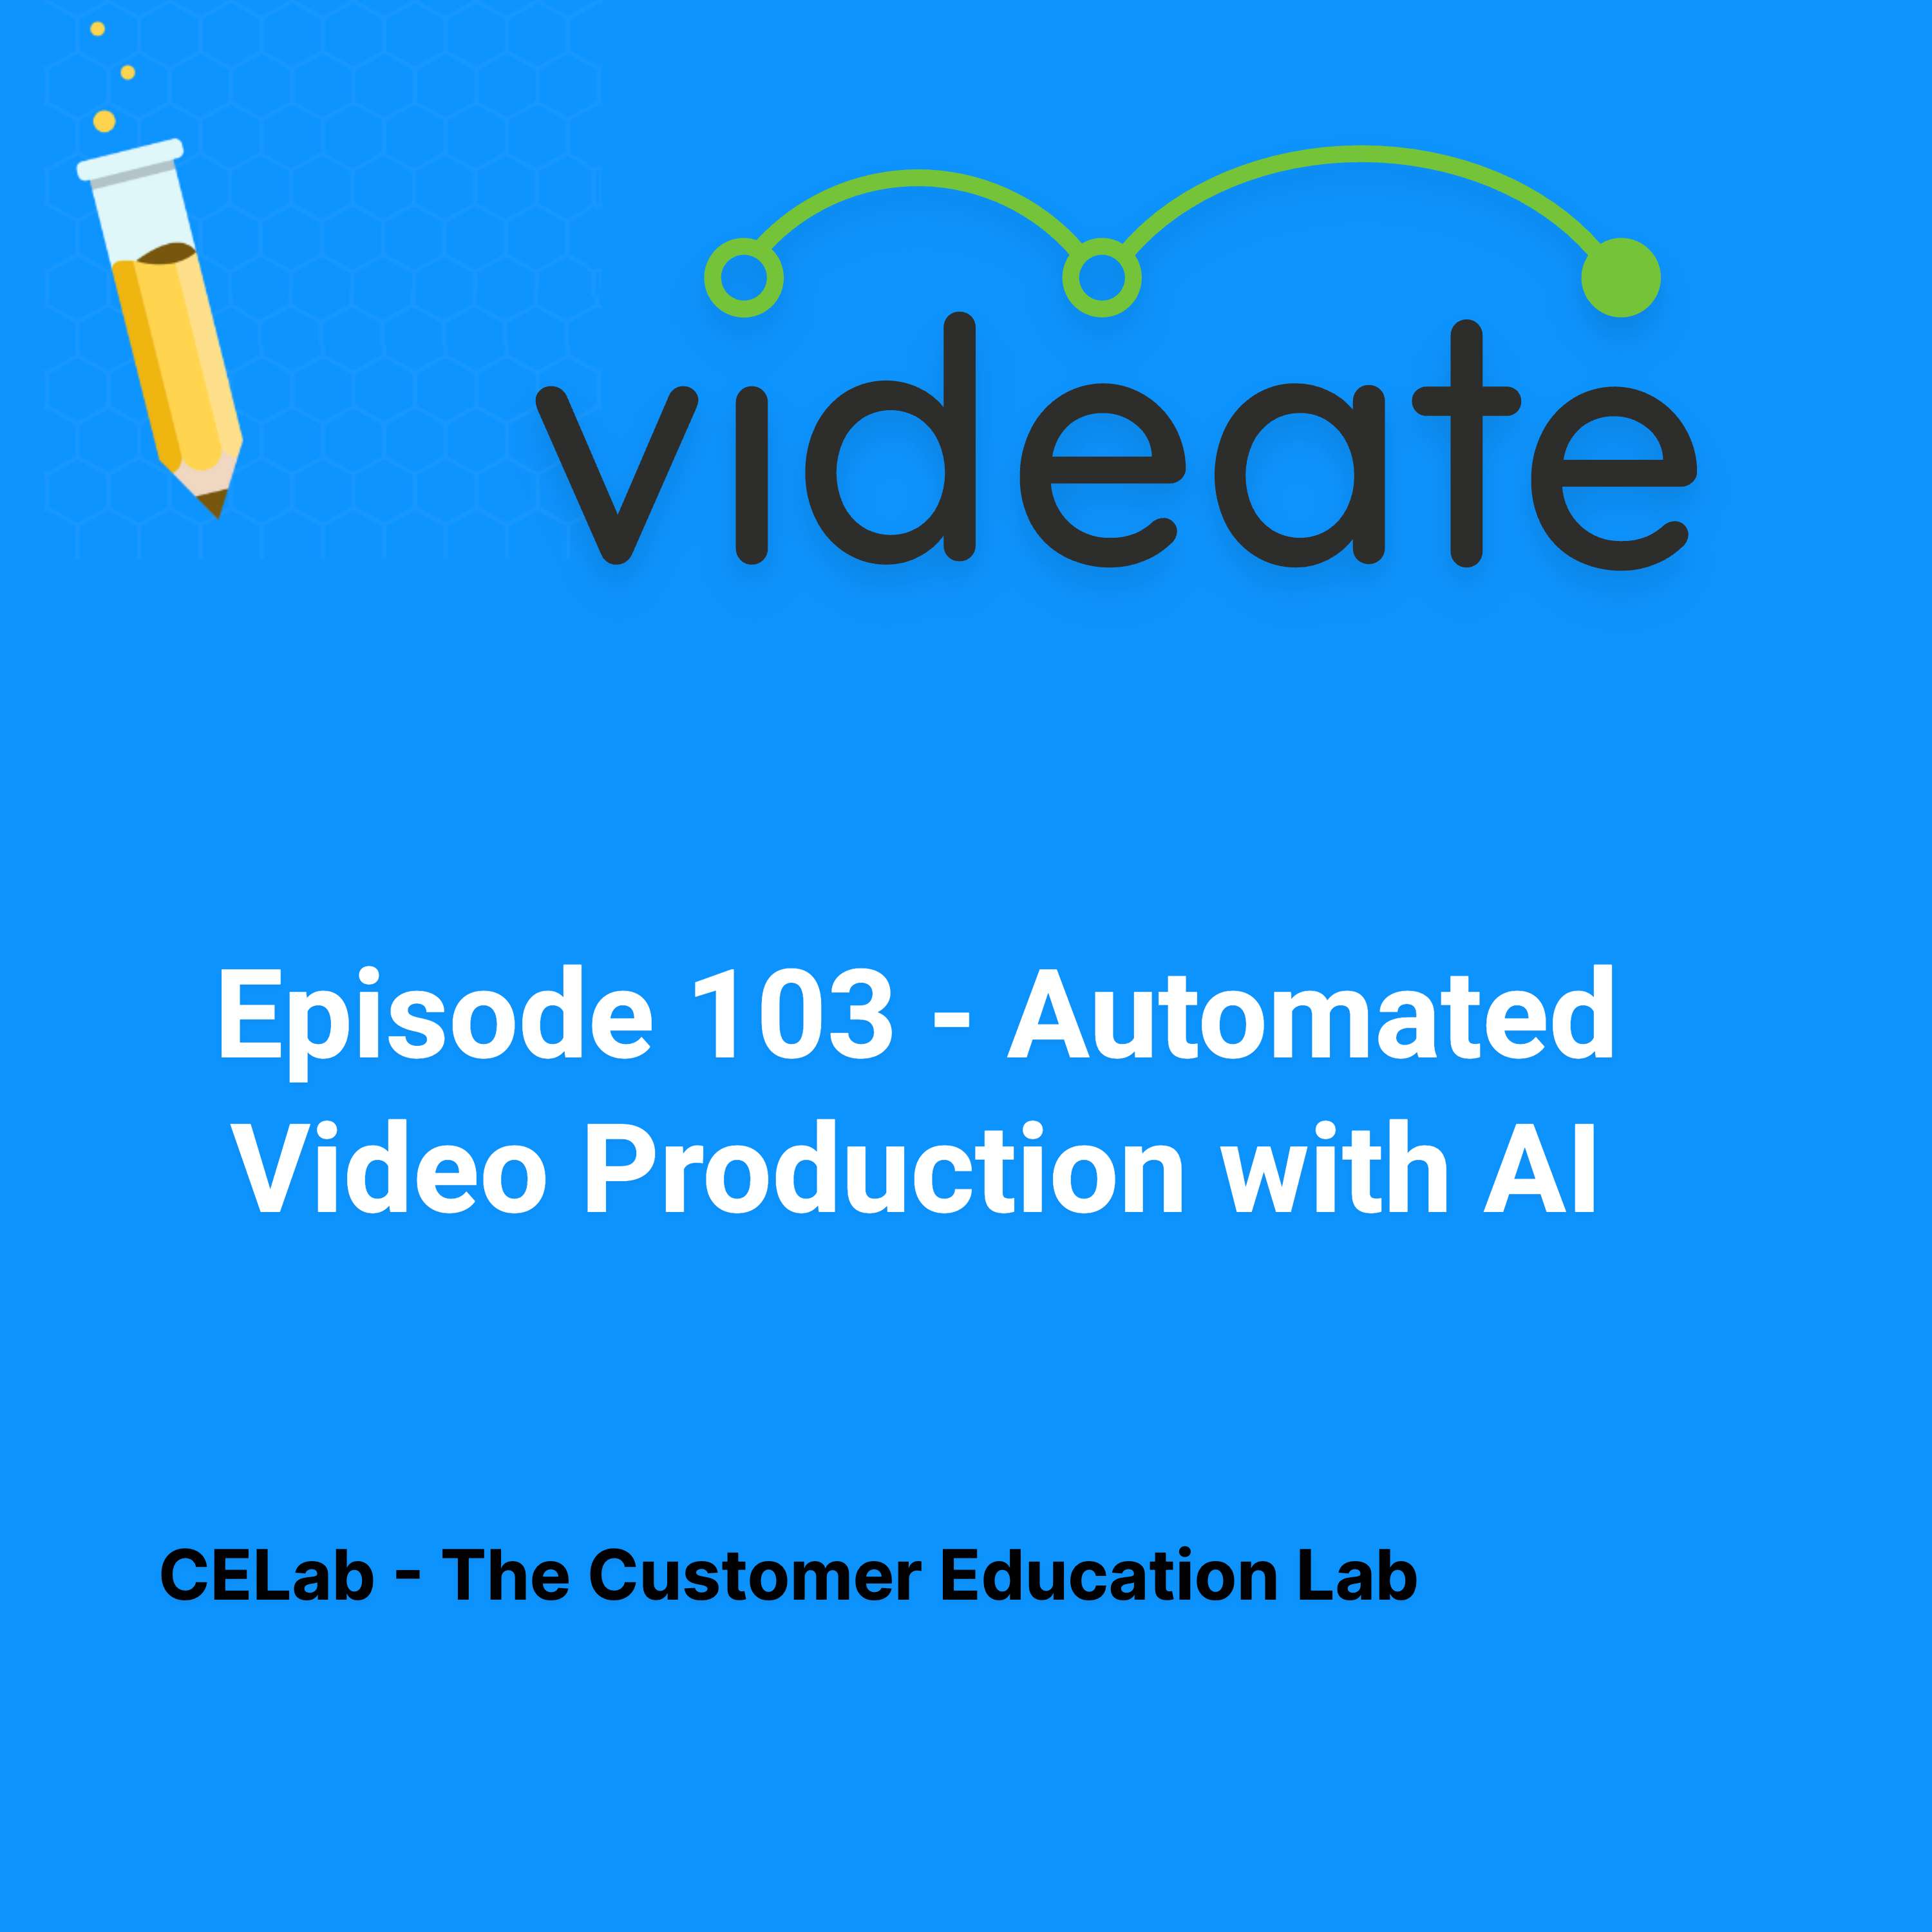  Episode 103 - Videate - Automated Video Production with AI